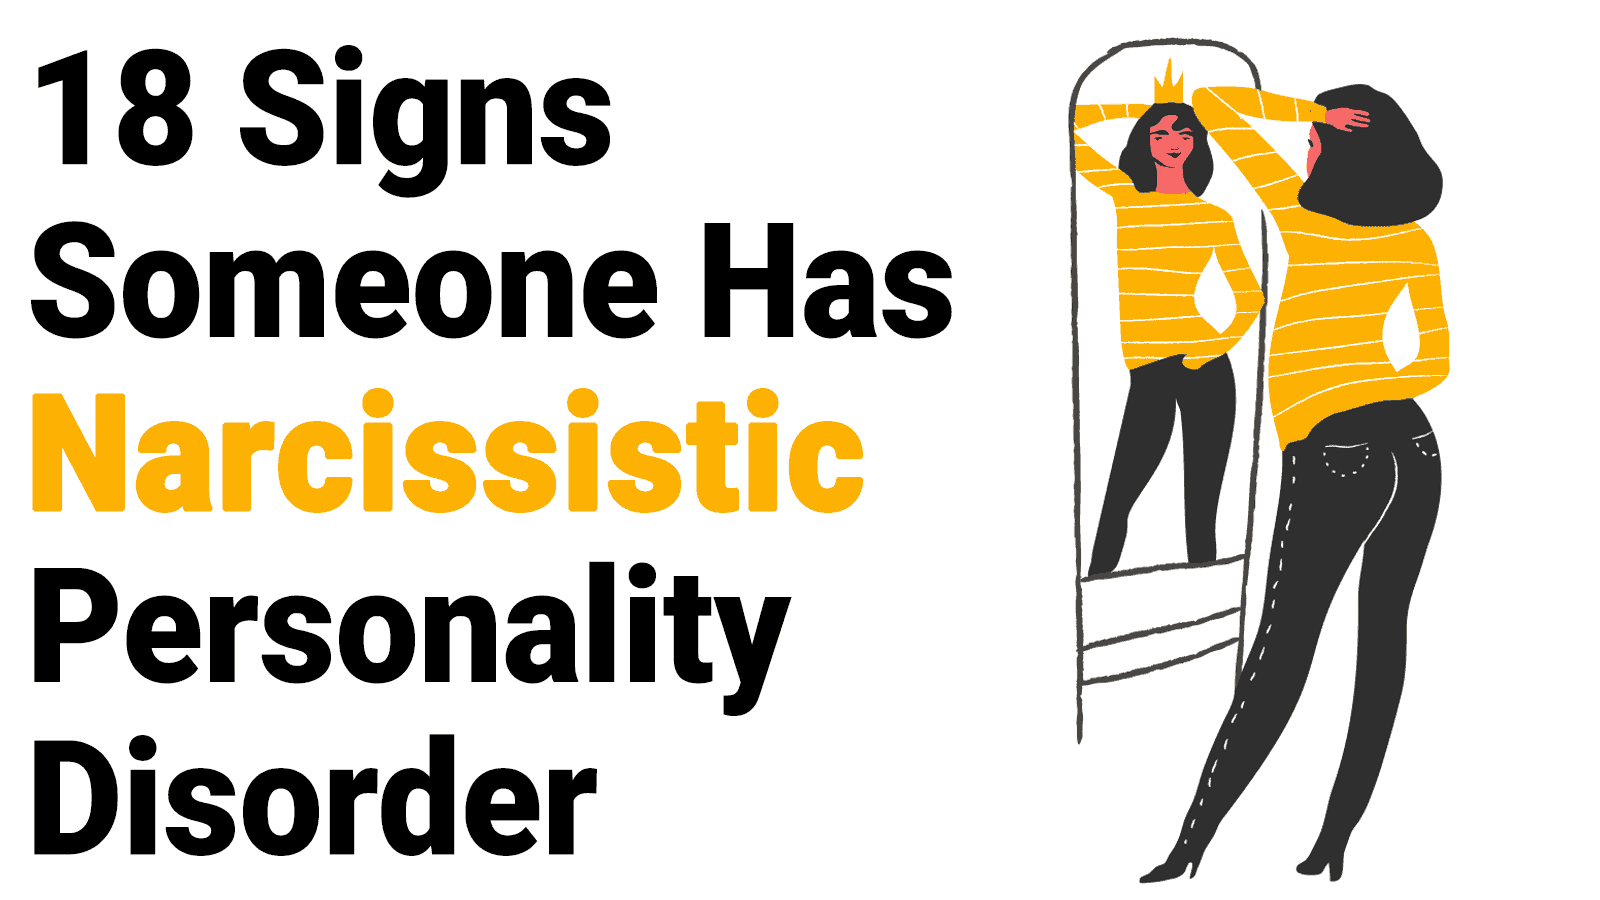 18 Signs Someone Has Narcissistic Personality Disorder.